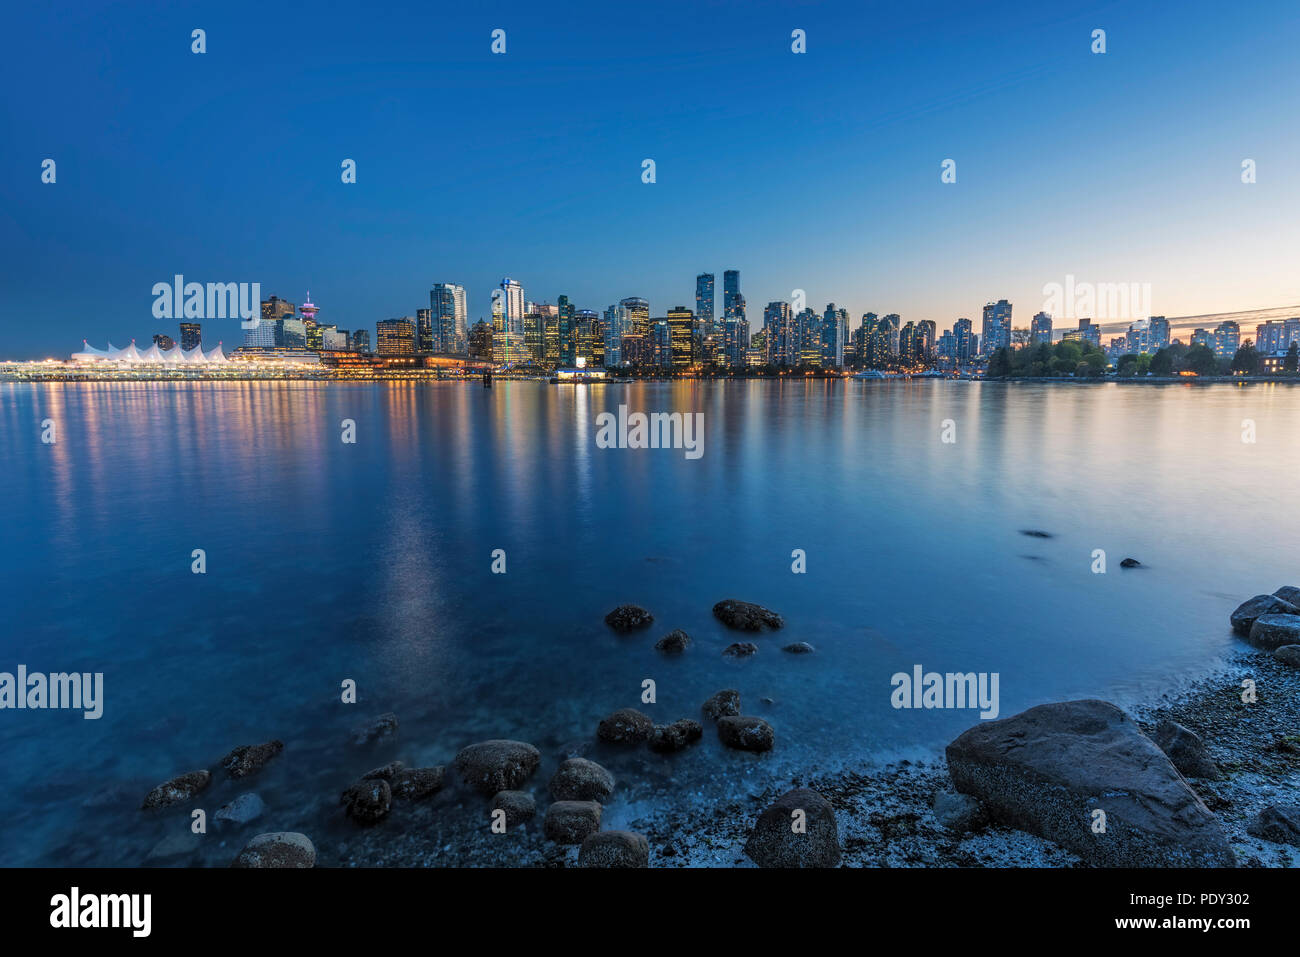 Skyline, skyscraper with Canada Place at night, view from Stanley Park, Vancouver, British Columbia, Canada Stock Photo